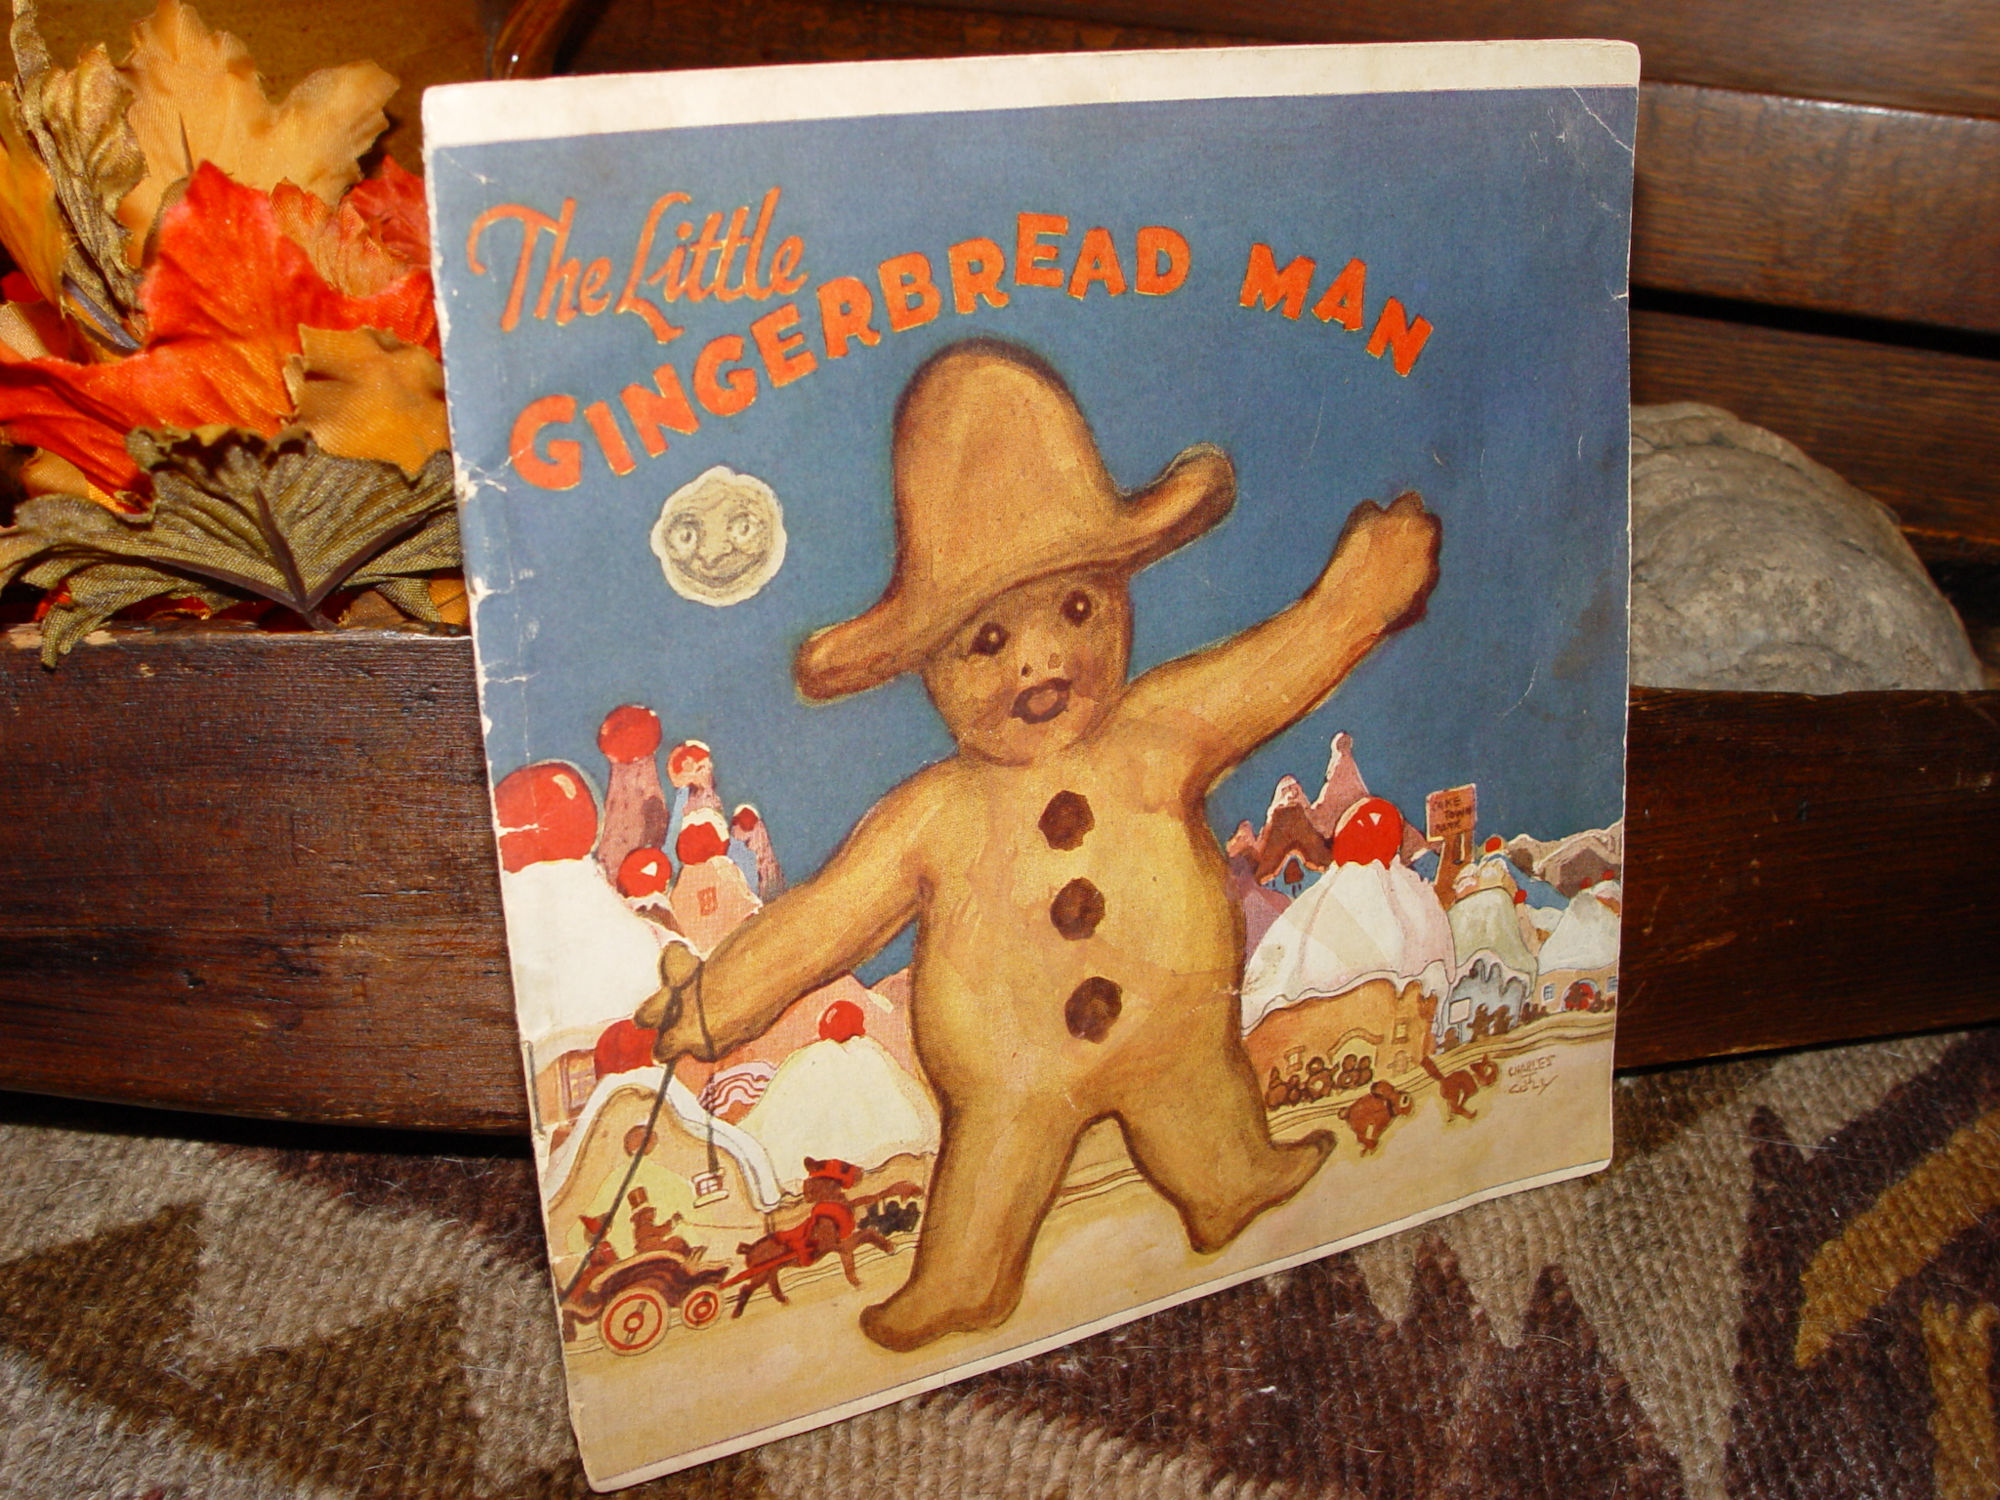 Royal Baking Powder Company's "The
                        Little Gingerbread Man" 1923 by Charles J.
                        Coll - Illustrator